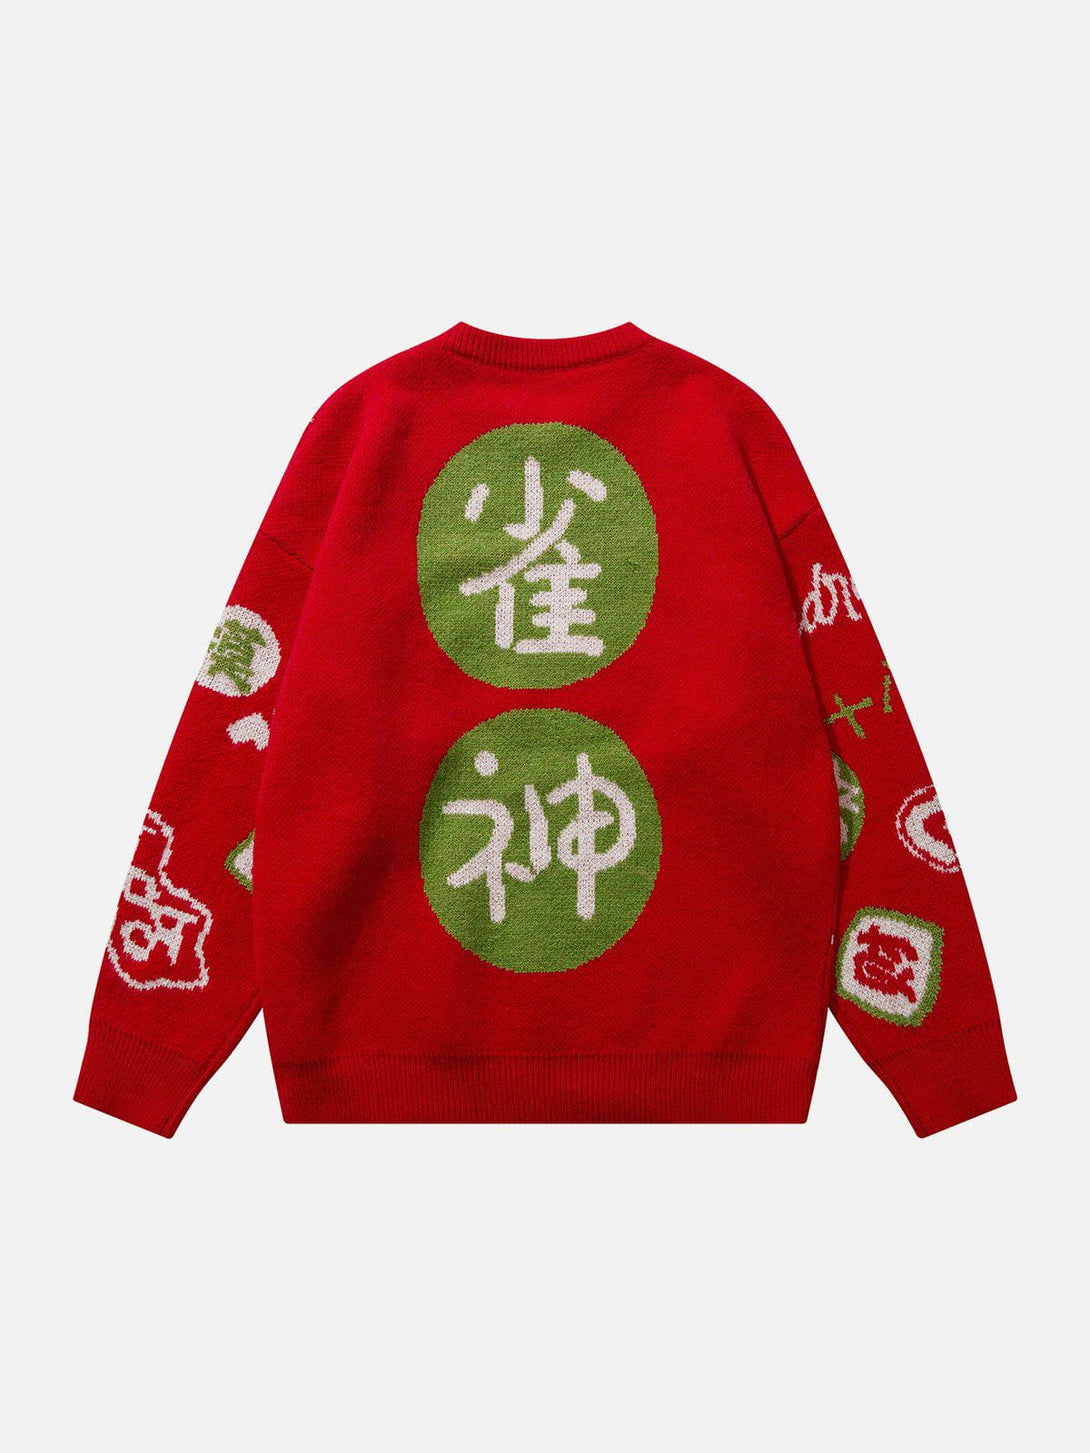 Levefly - Mahjong Embroidery Sweater - Streetwear Fashion - levefly.com